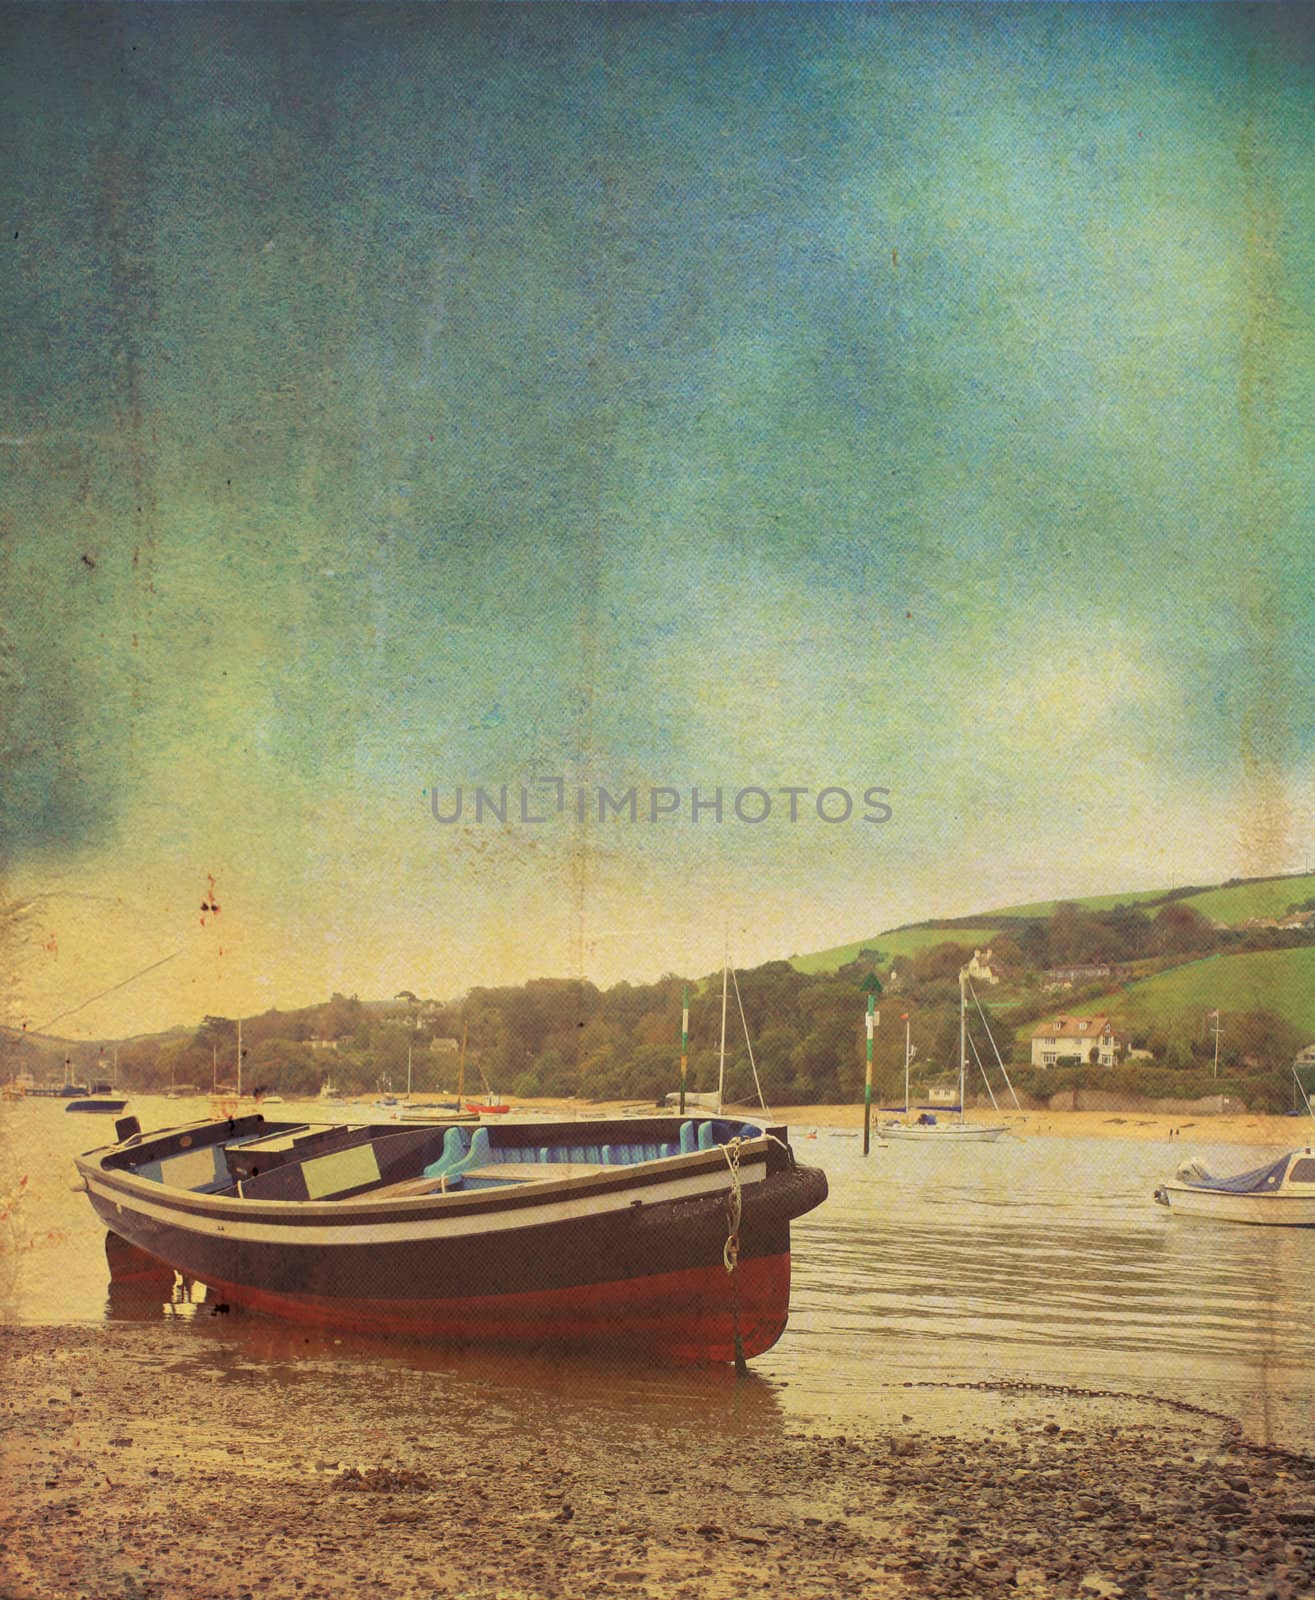 A small wooden ferry boat at low tide at salcombe in devon. A vintage or grunge style effect has been applied. set on a portrait format with room for copy above.